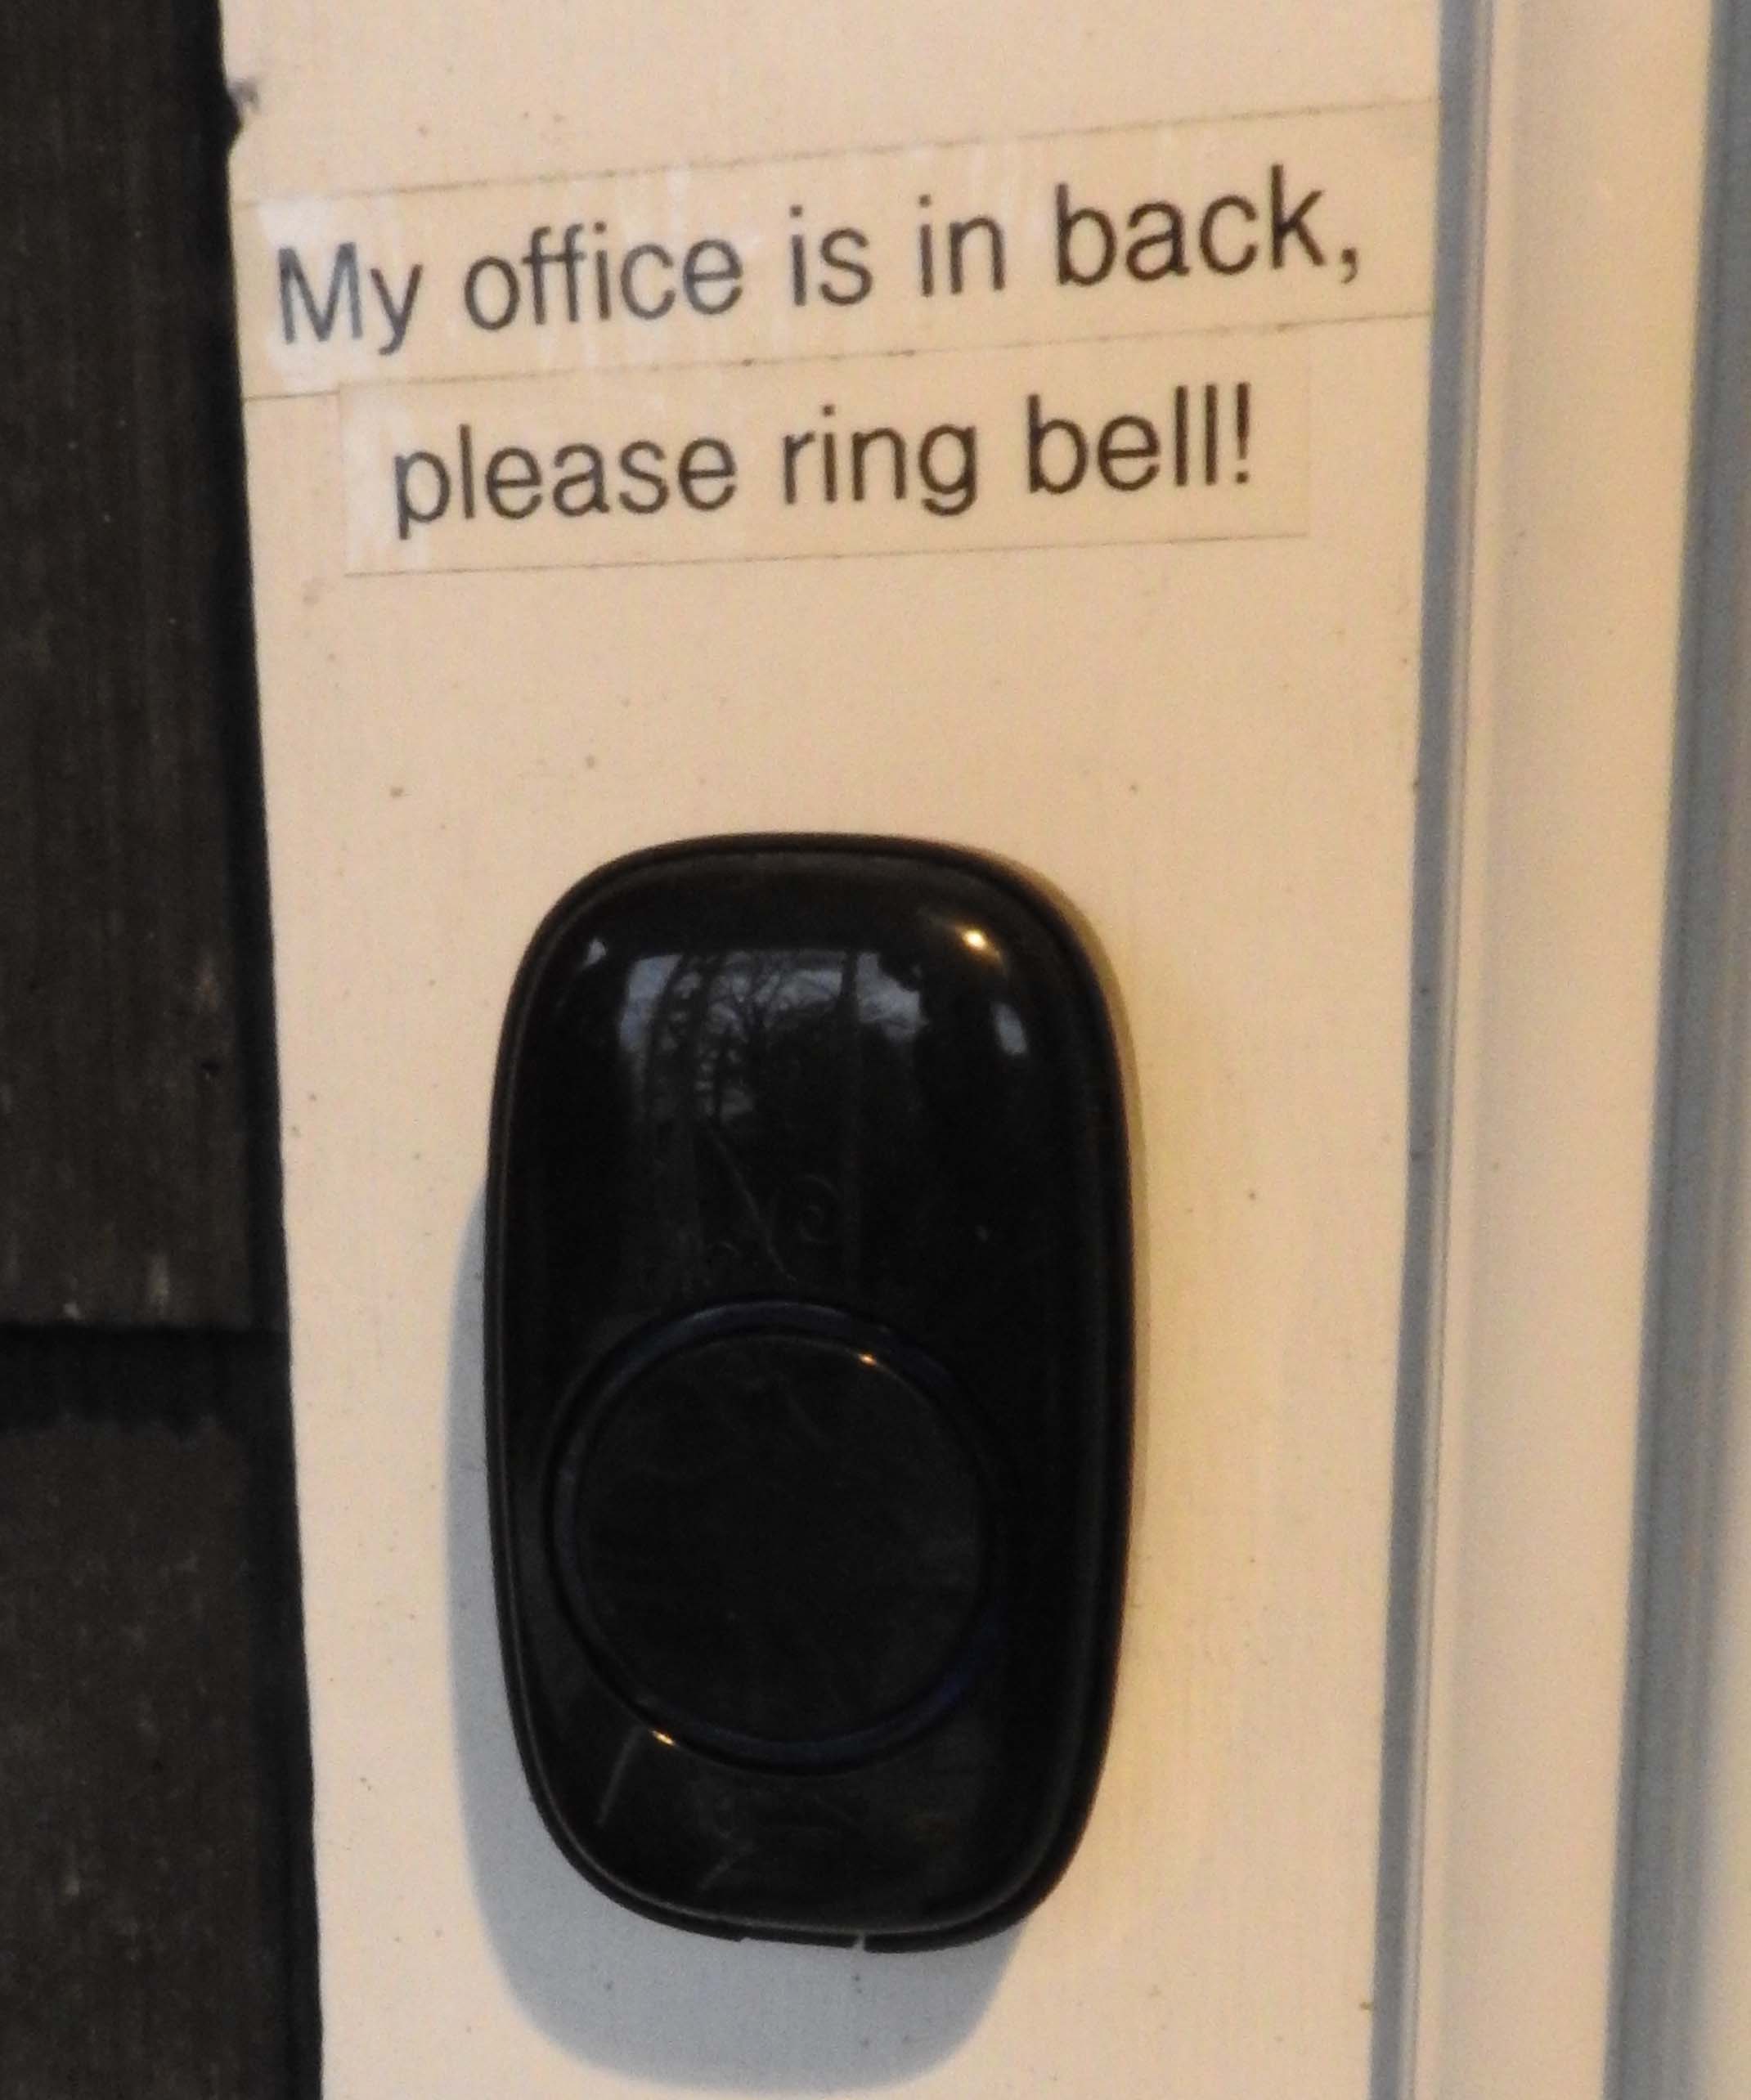 Ring Bell Sign